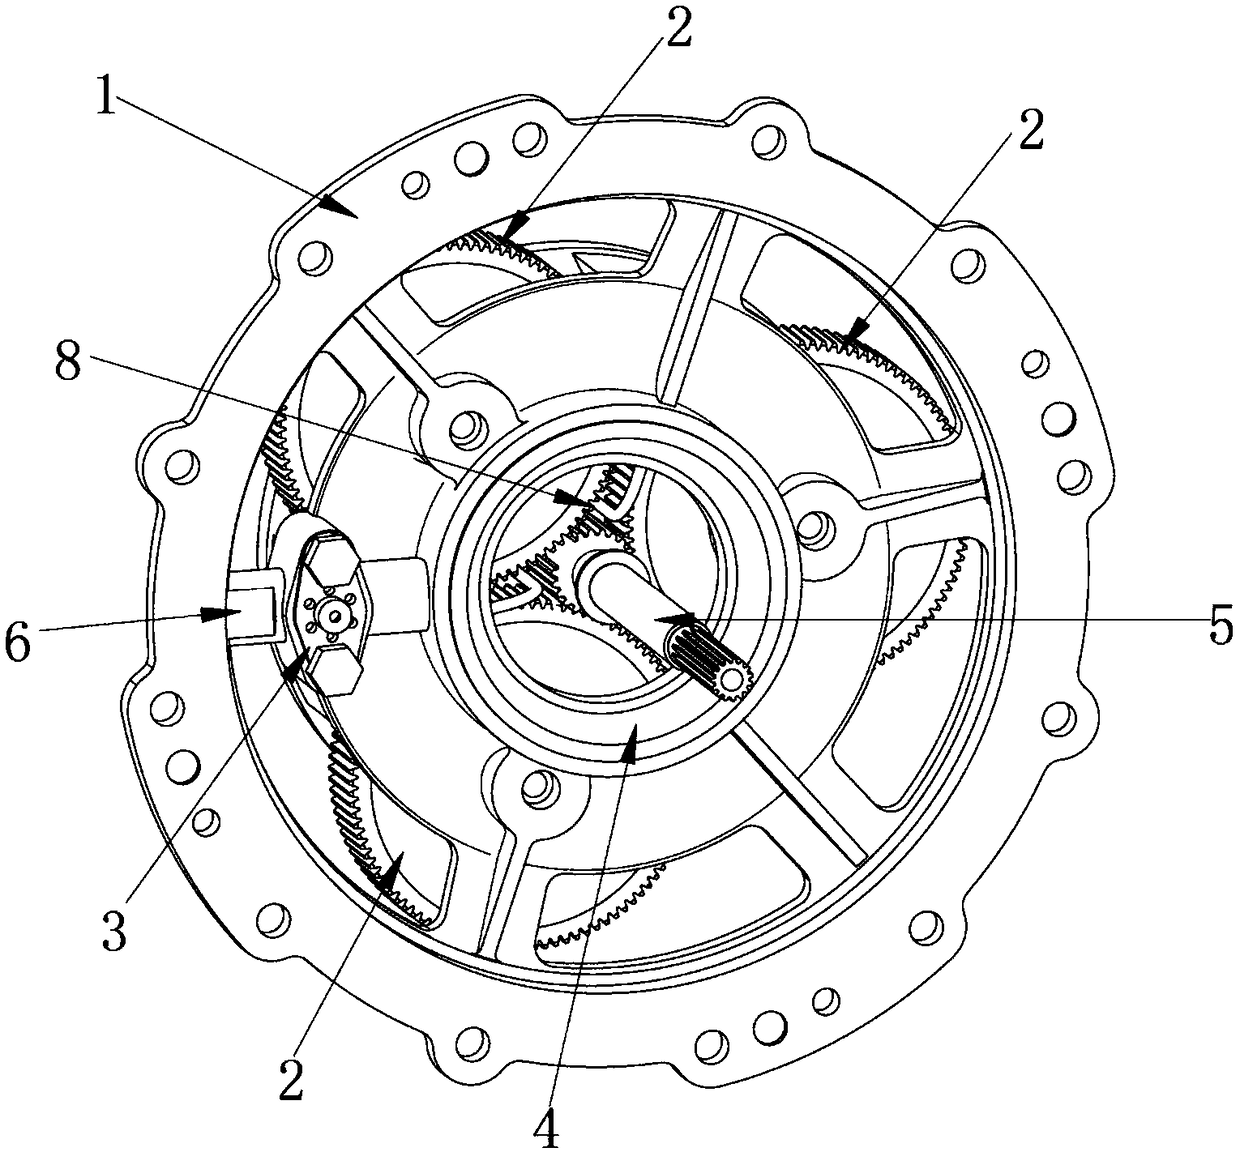 Lubricating structure of speed reduction transmission device for gas turbine